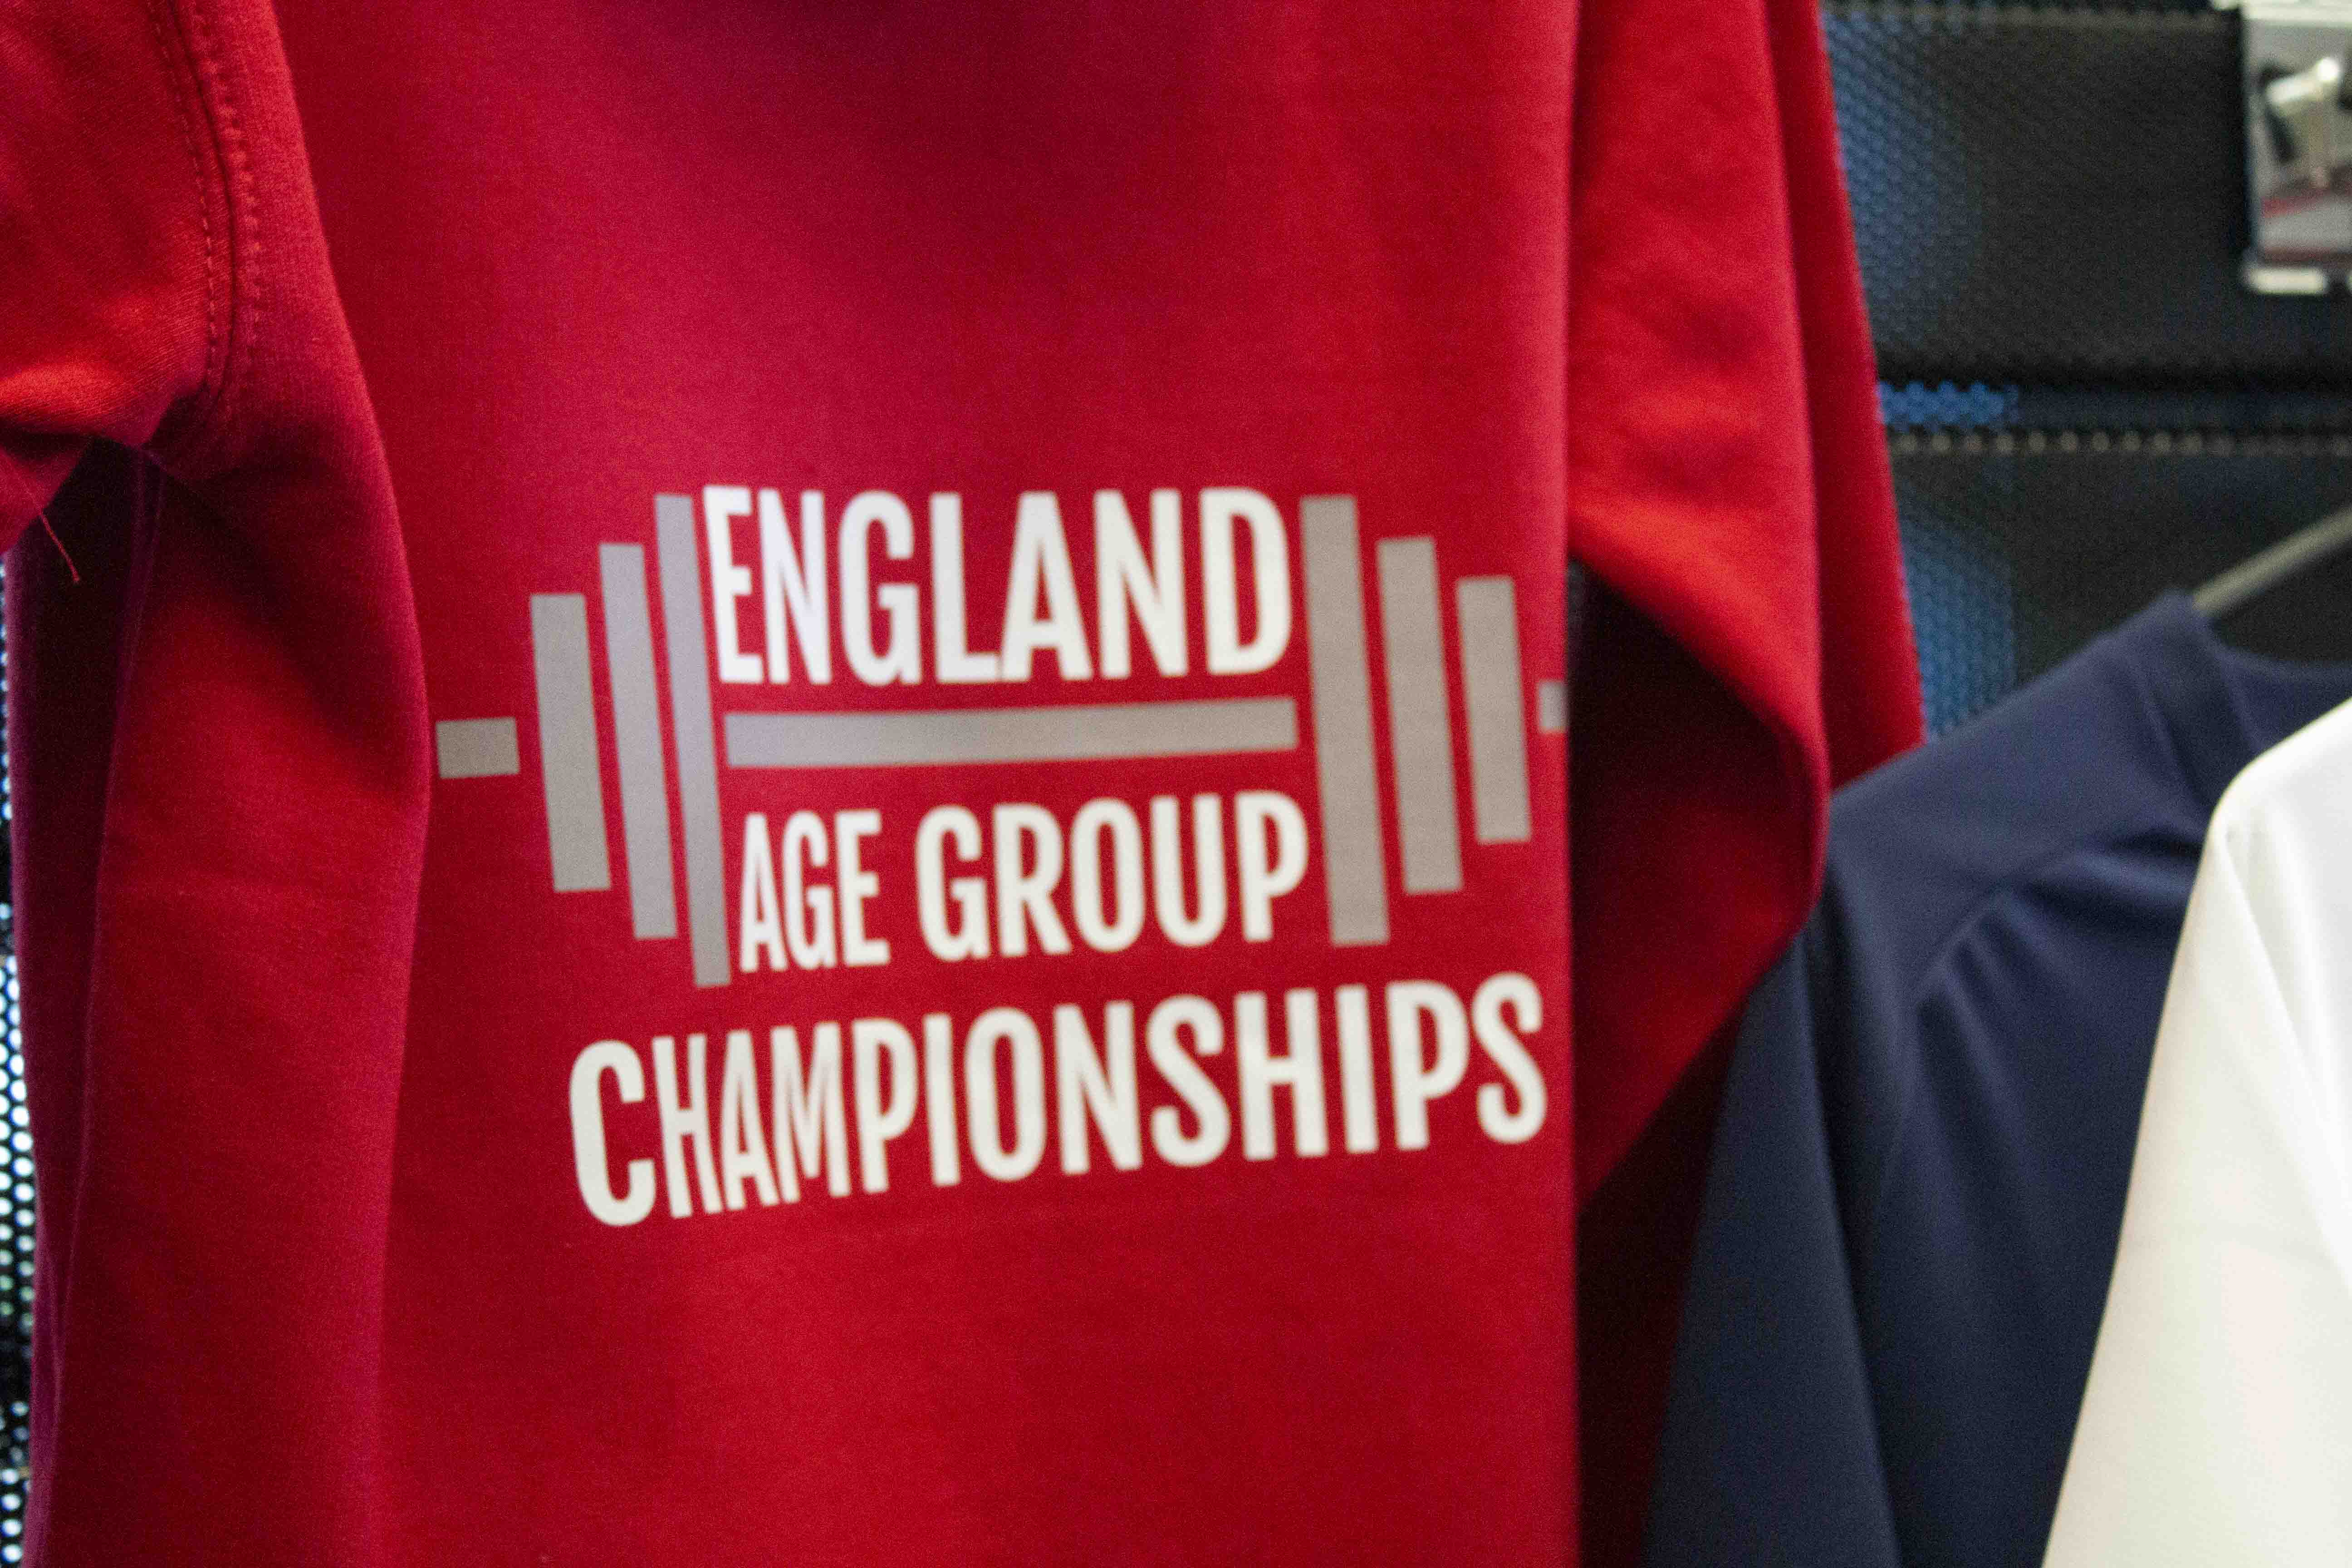 2023 England Age Group Championships results